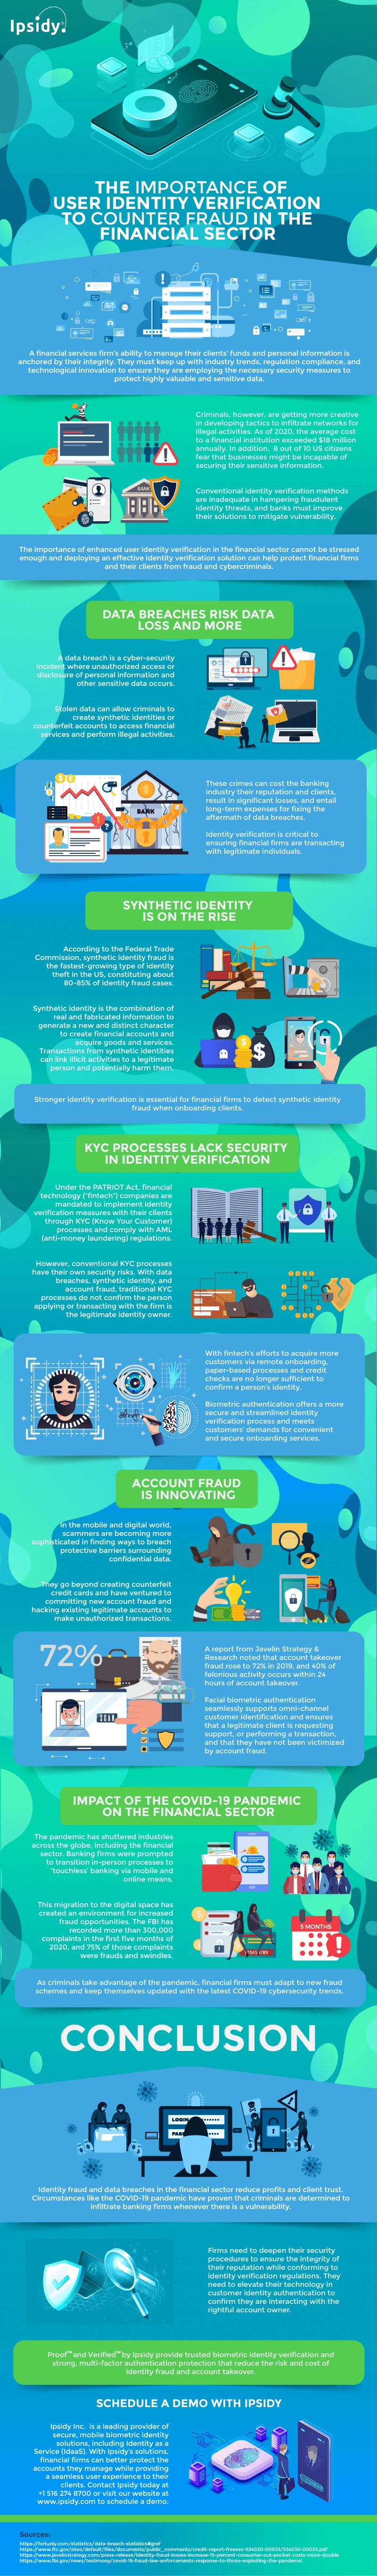 The Importance of Trusted User Identity Verification to Counter Fraud in the Financial Sector #Infographic